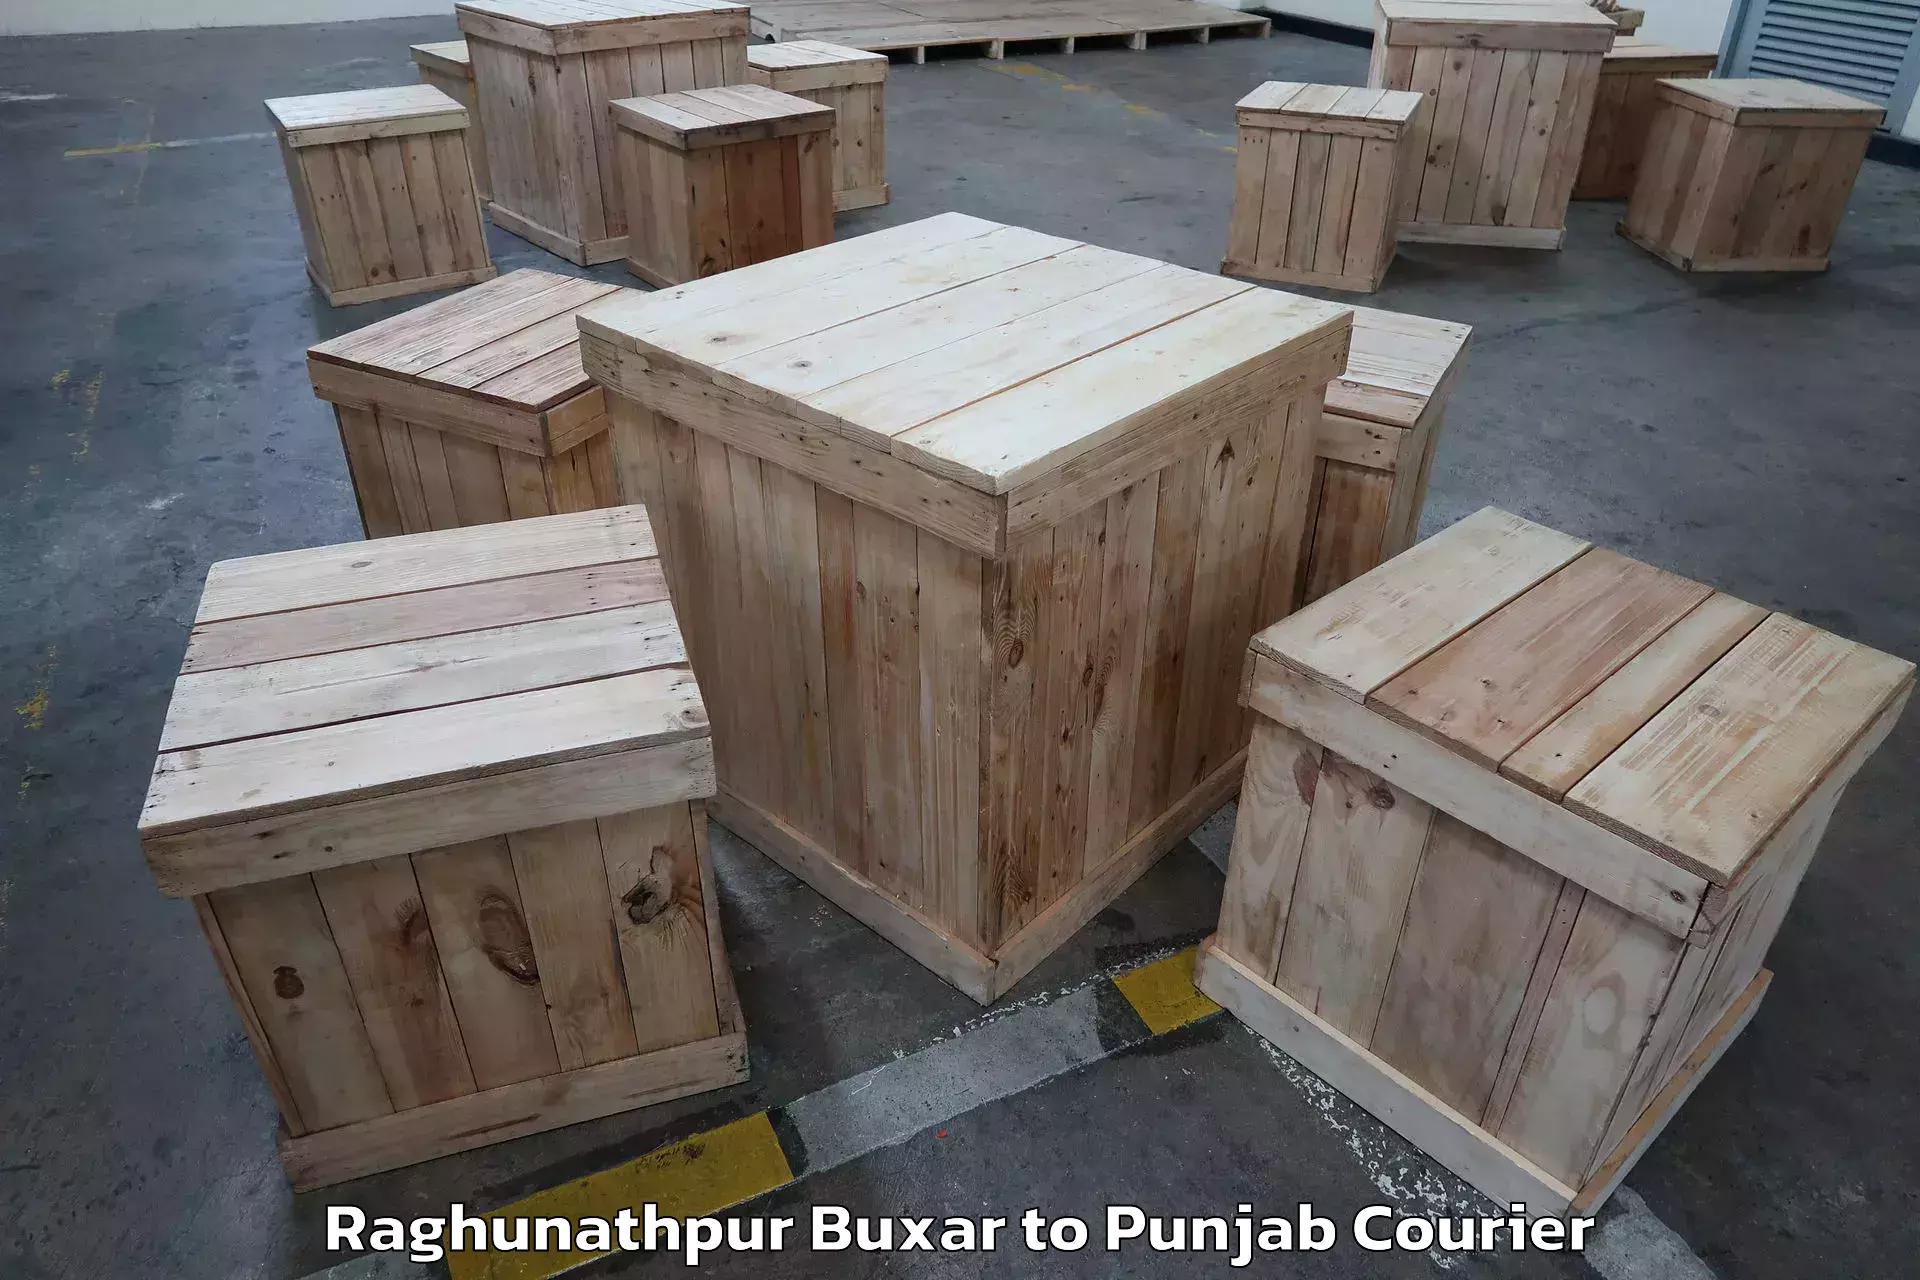 Furniture moving specialists in Raghunathpur Buxar to Patiala